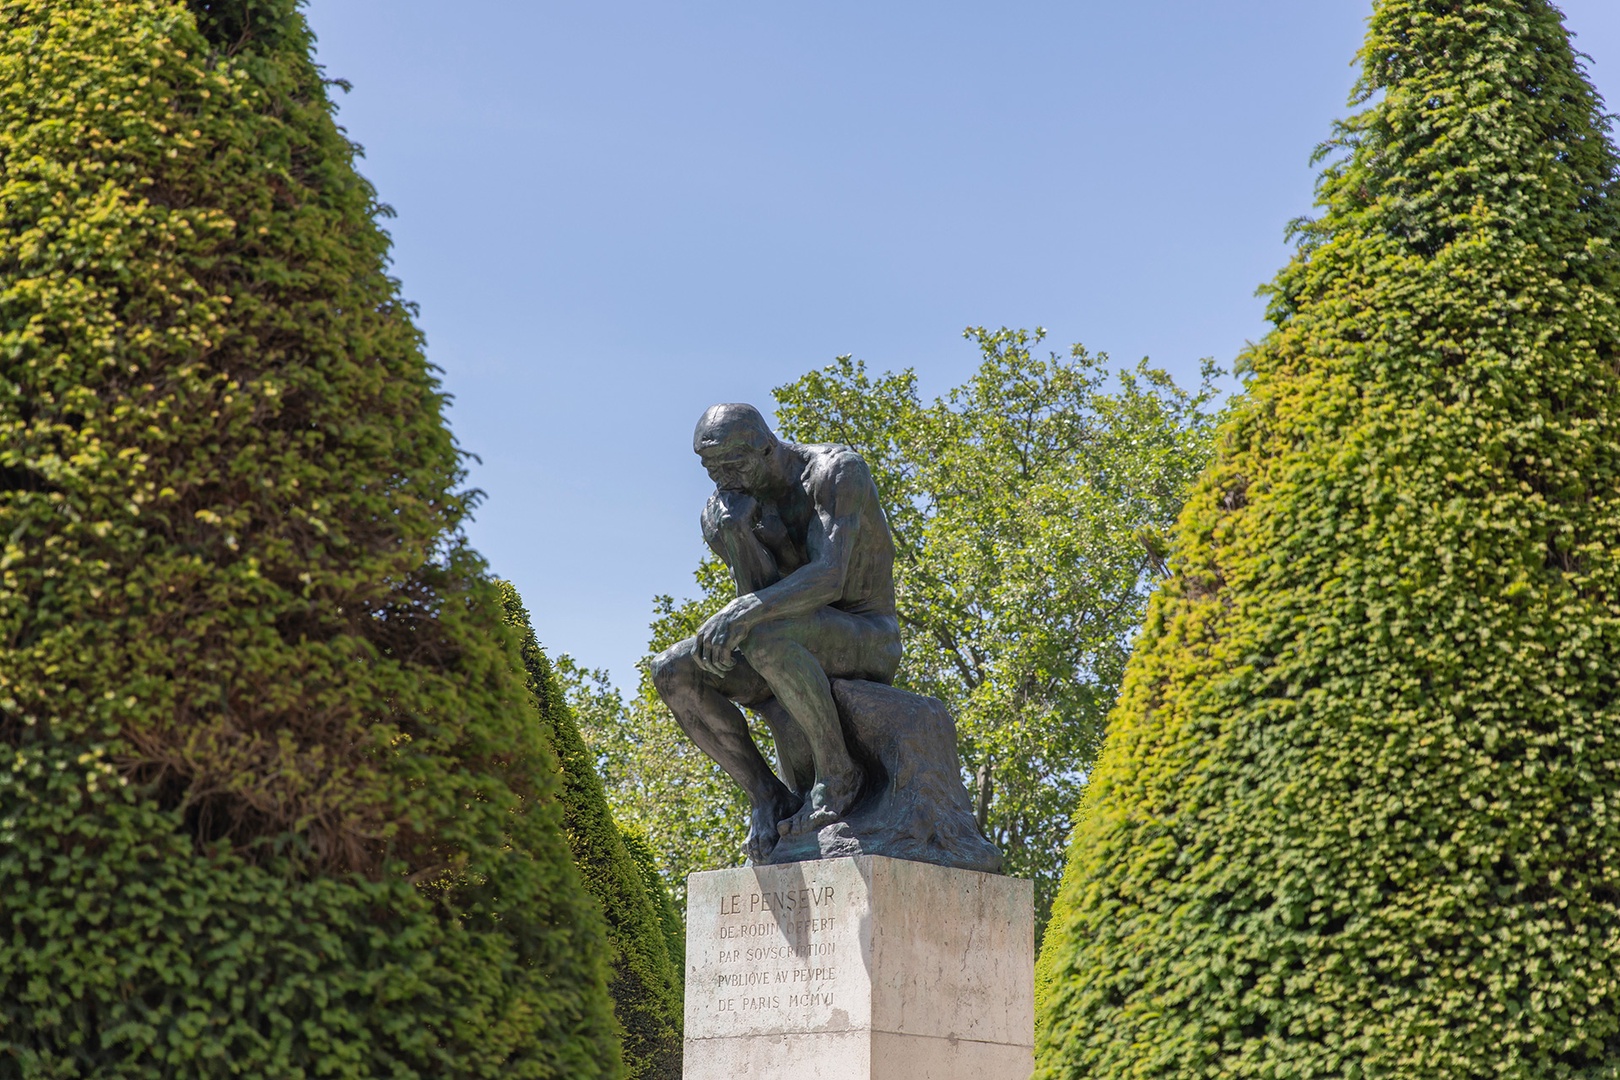 The Rodin Museum garden is full of the artist's masterpieces.